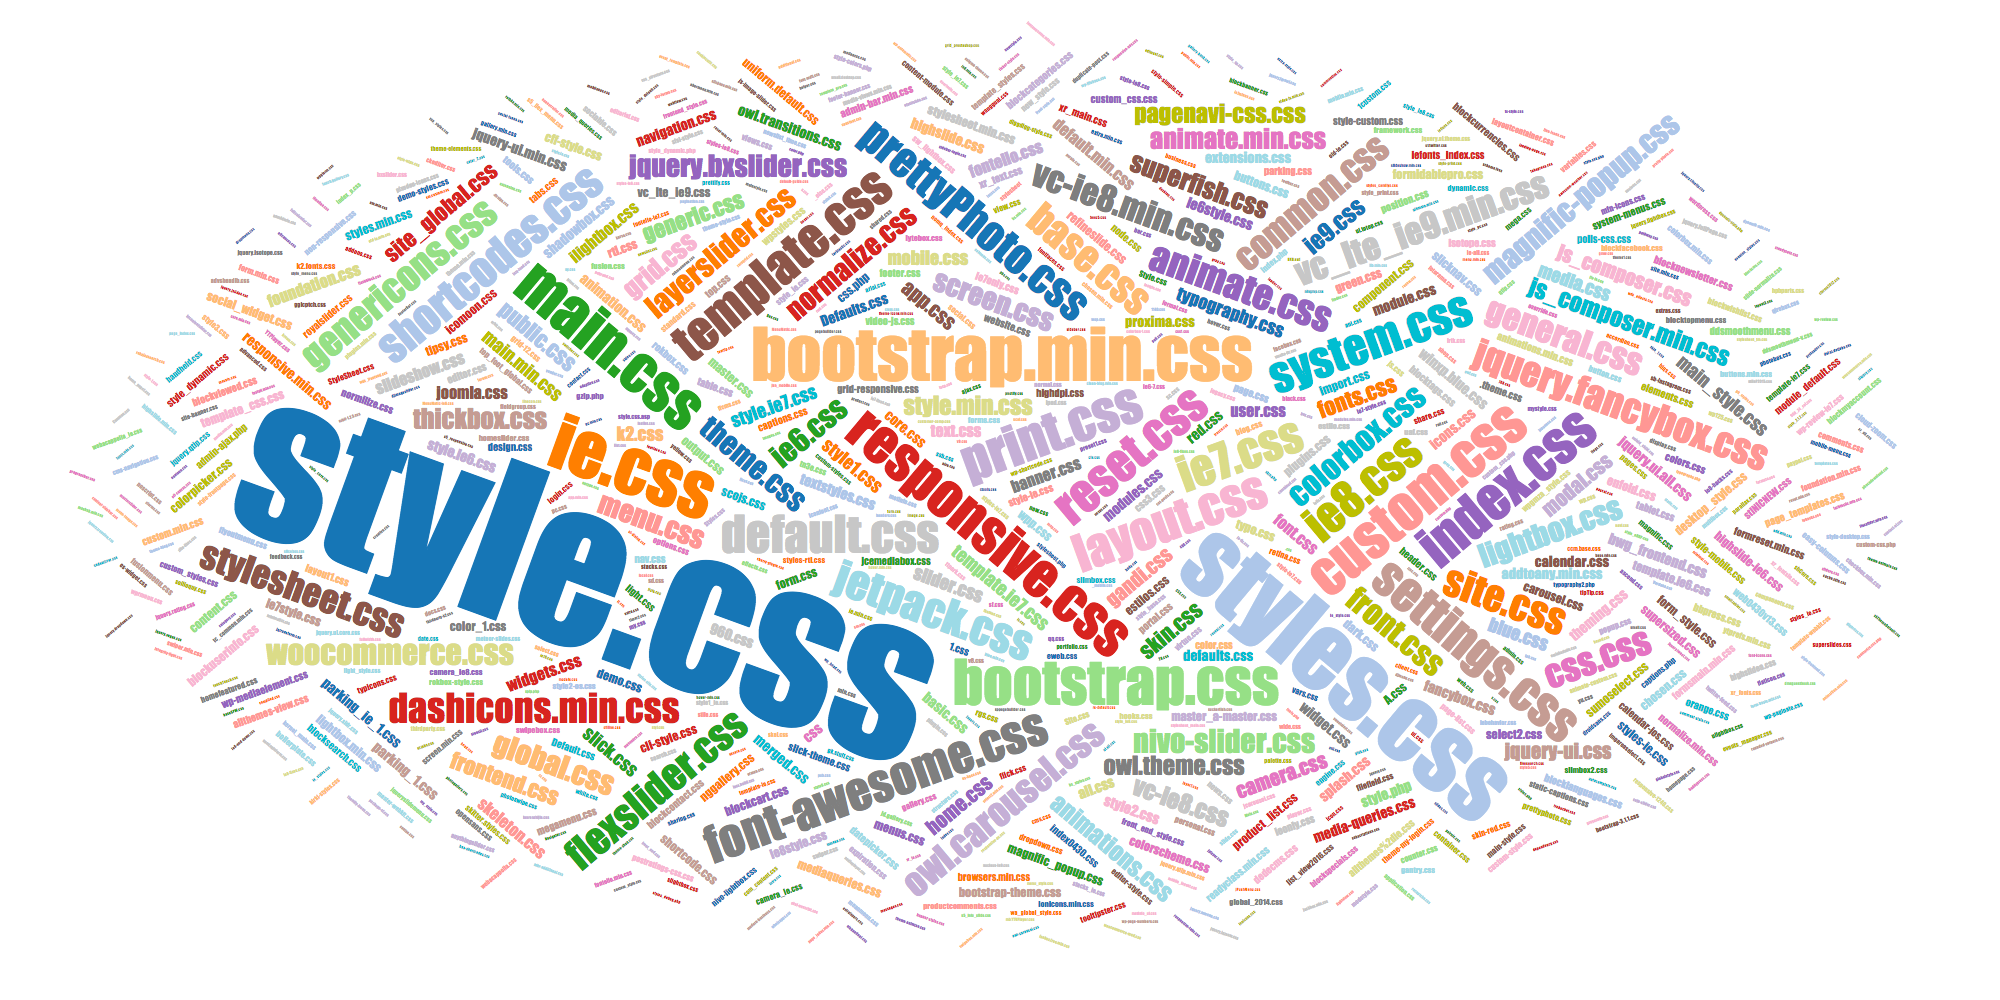 Popular names of CSS files enfold.css, edition121114.css, etc.